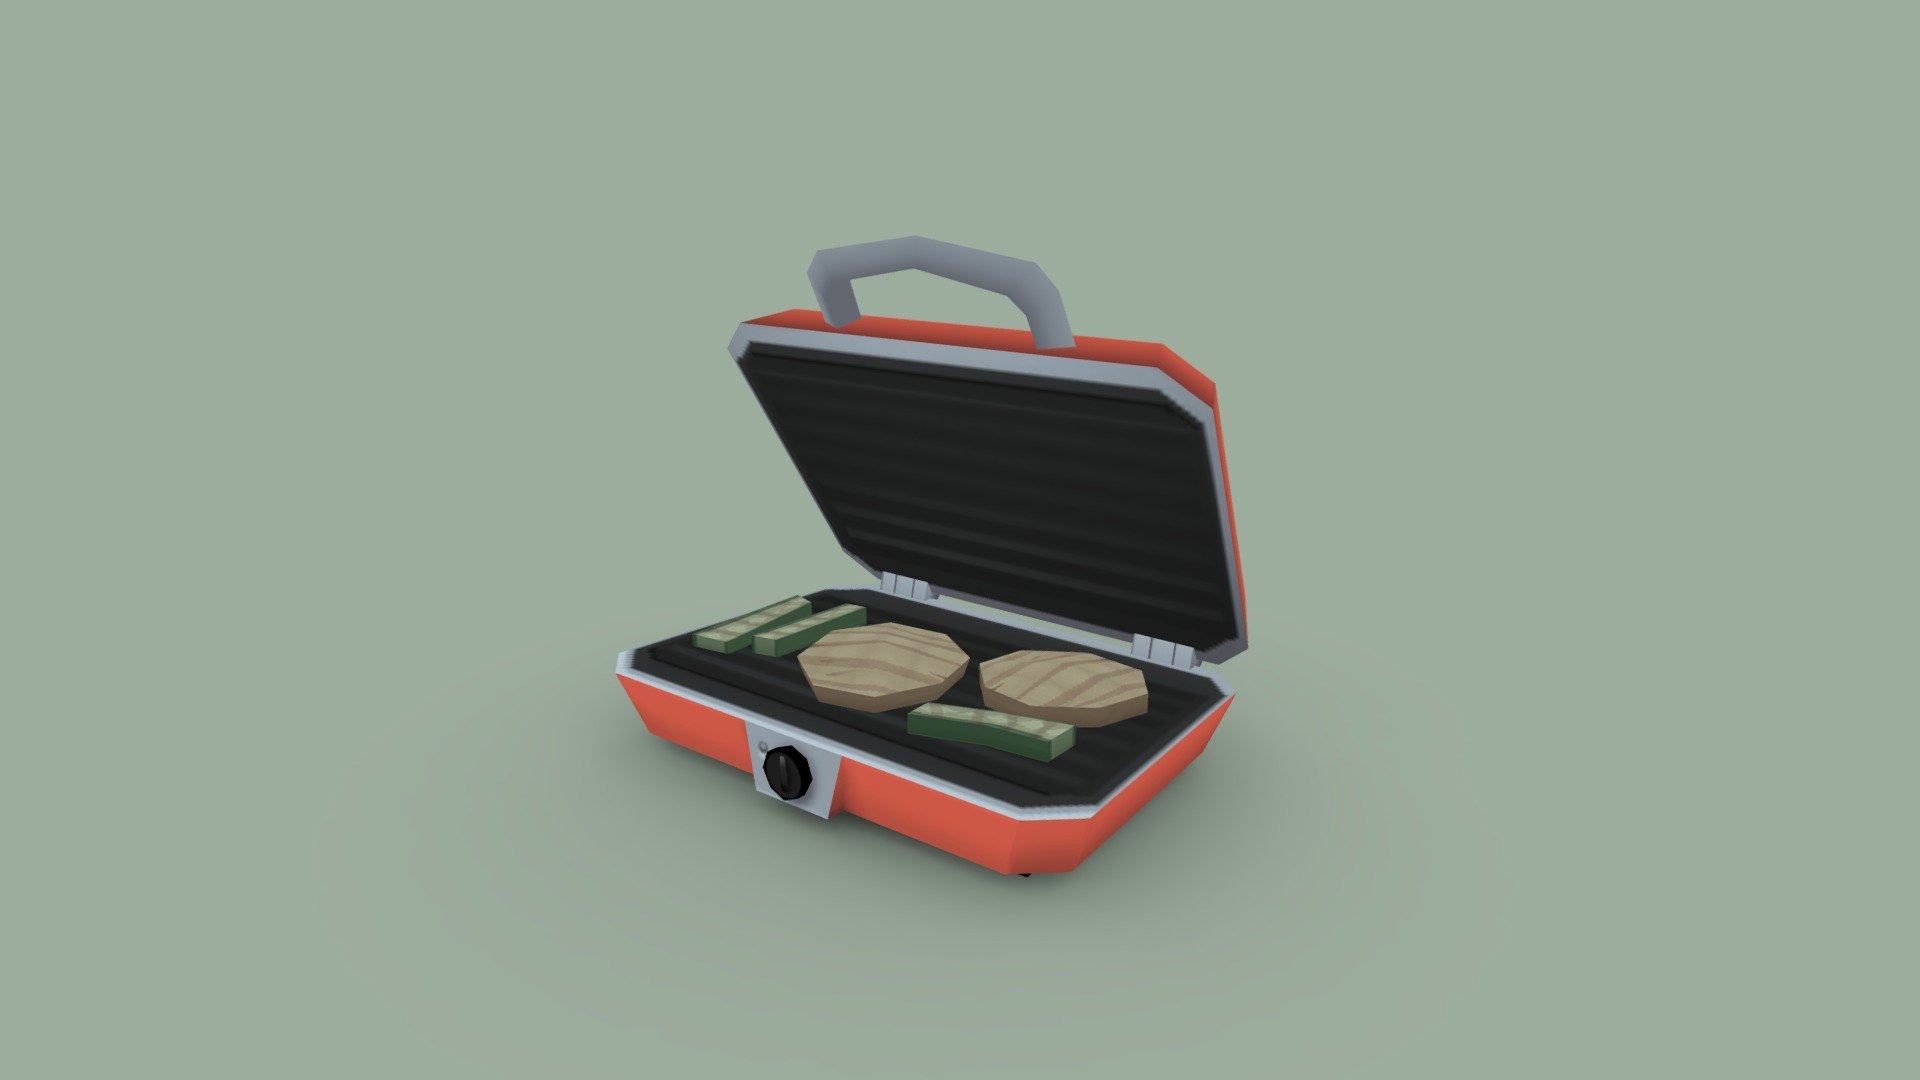 Grill, created with blender and Photoshop - Grill - Household Props #21 - 3D model by plasmaernst 3d model